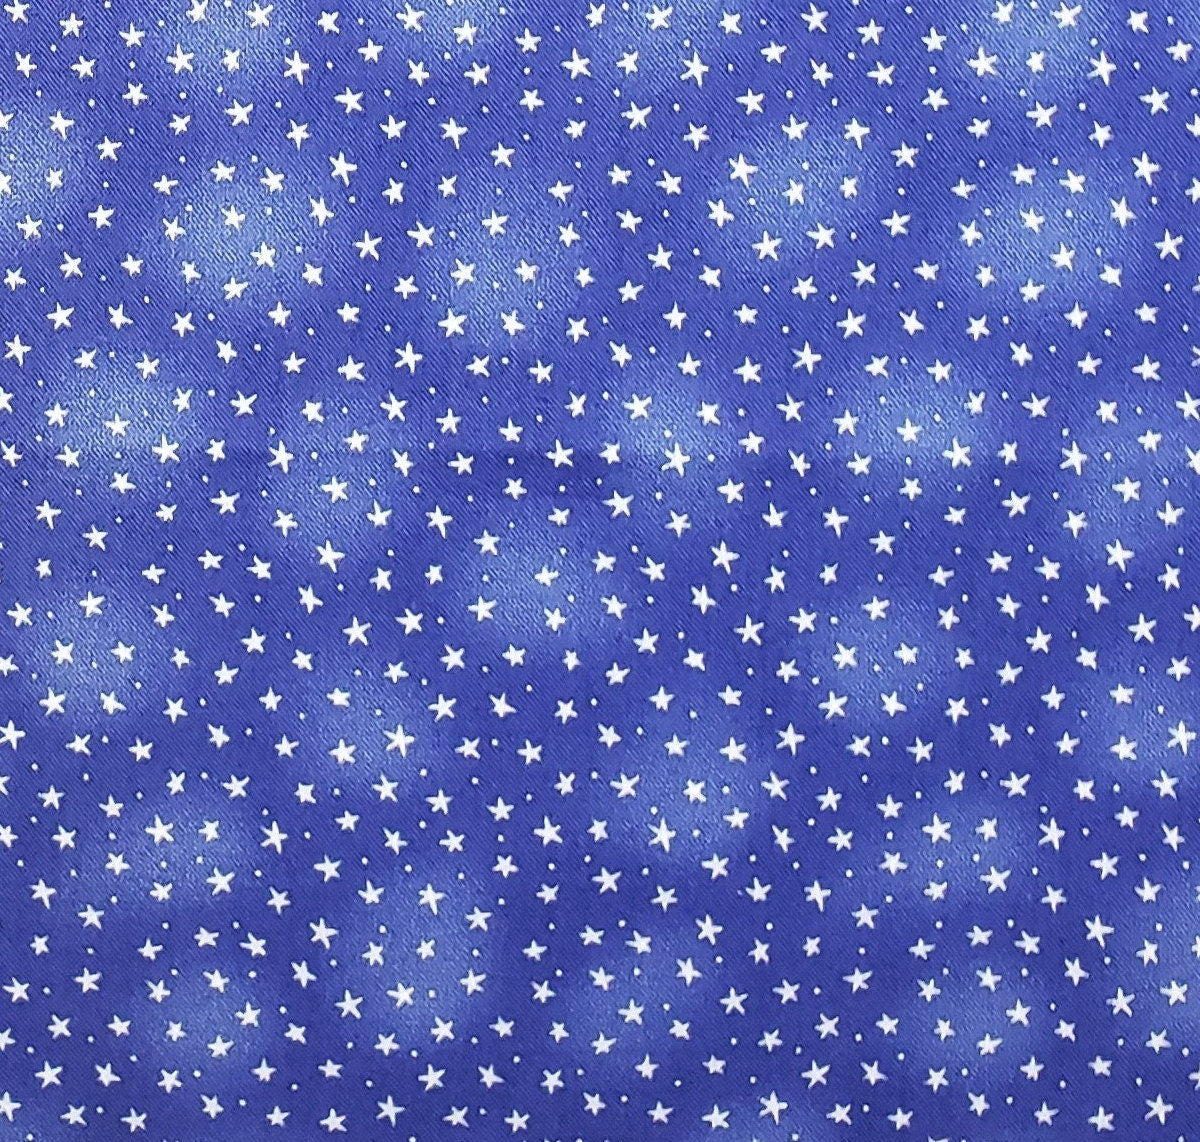 2004 Blank Textiles, Inc. - Tonal Blue Fabric with Tiny White Stars and Dots